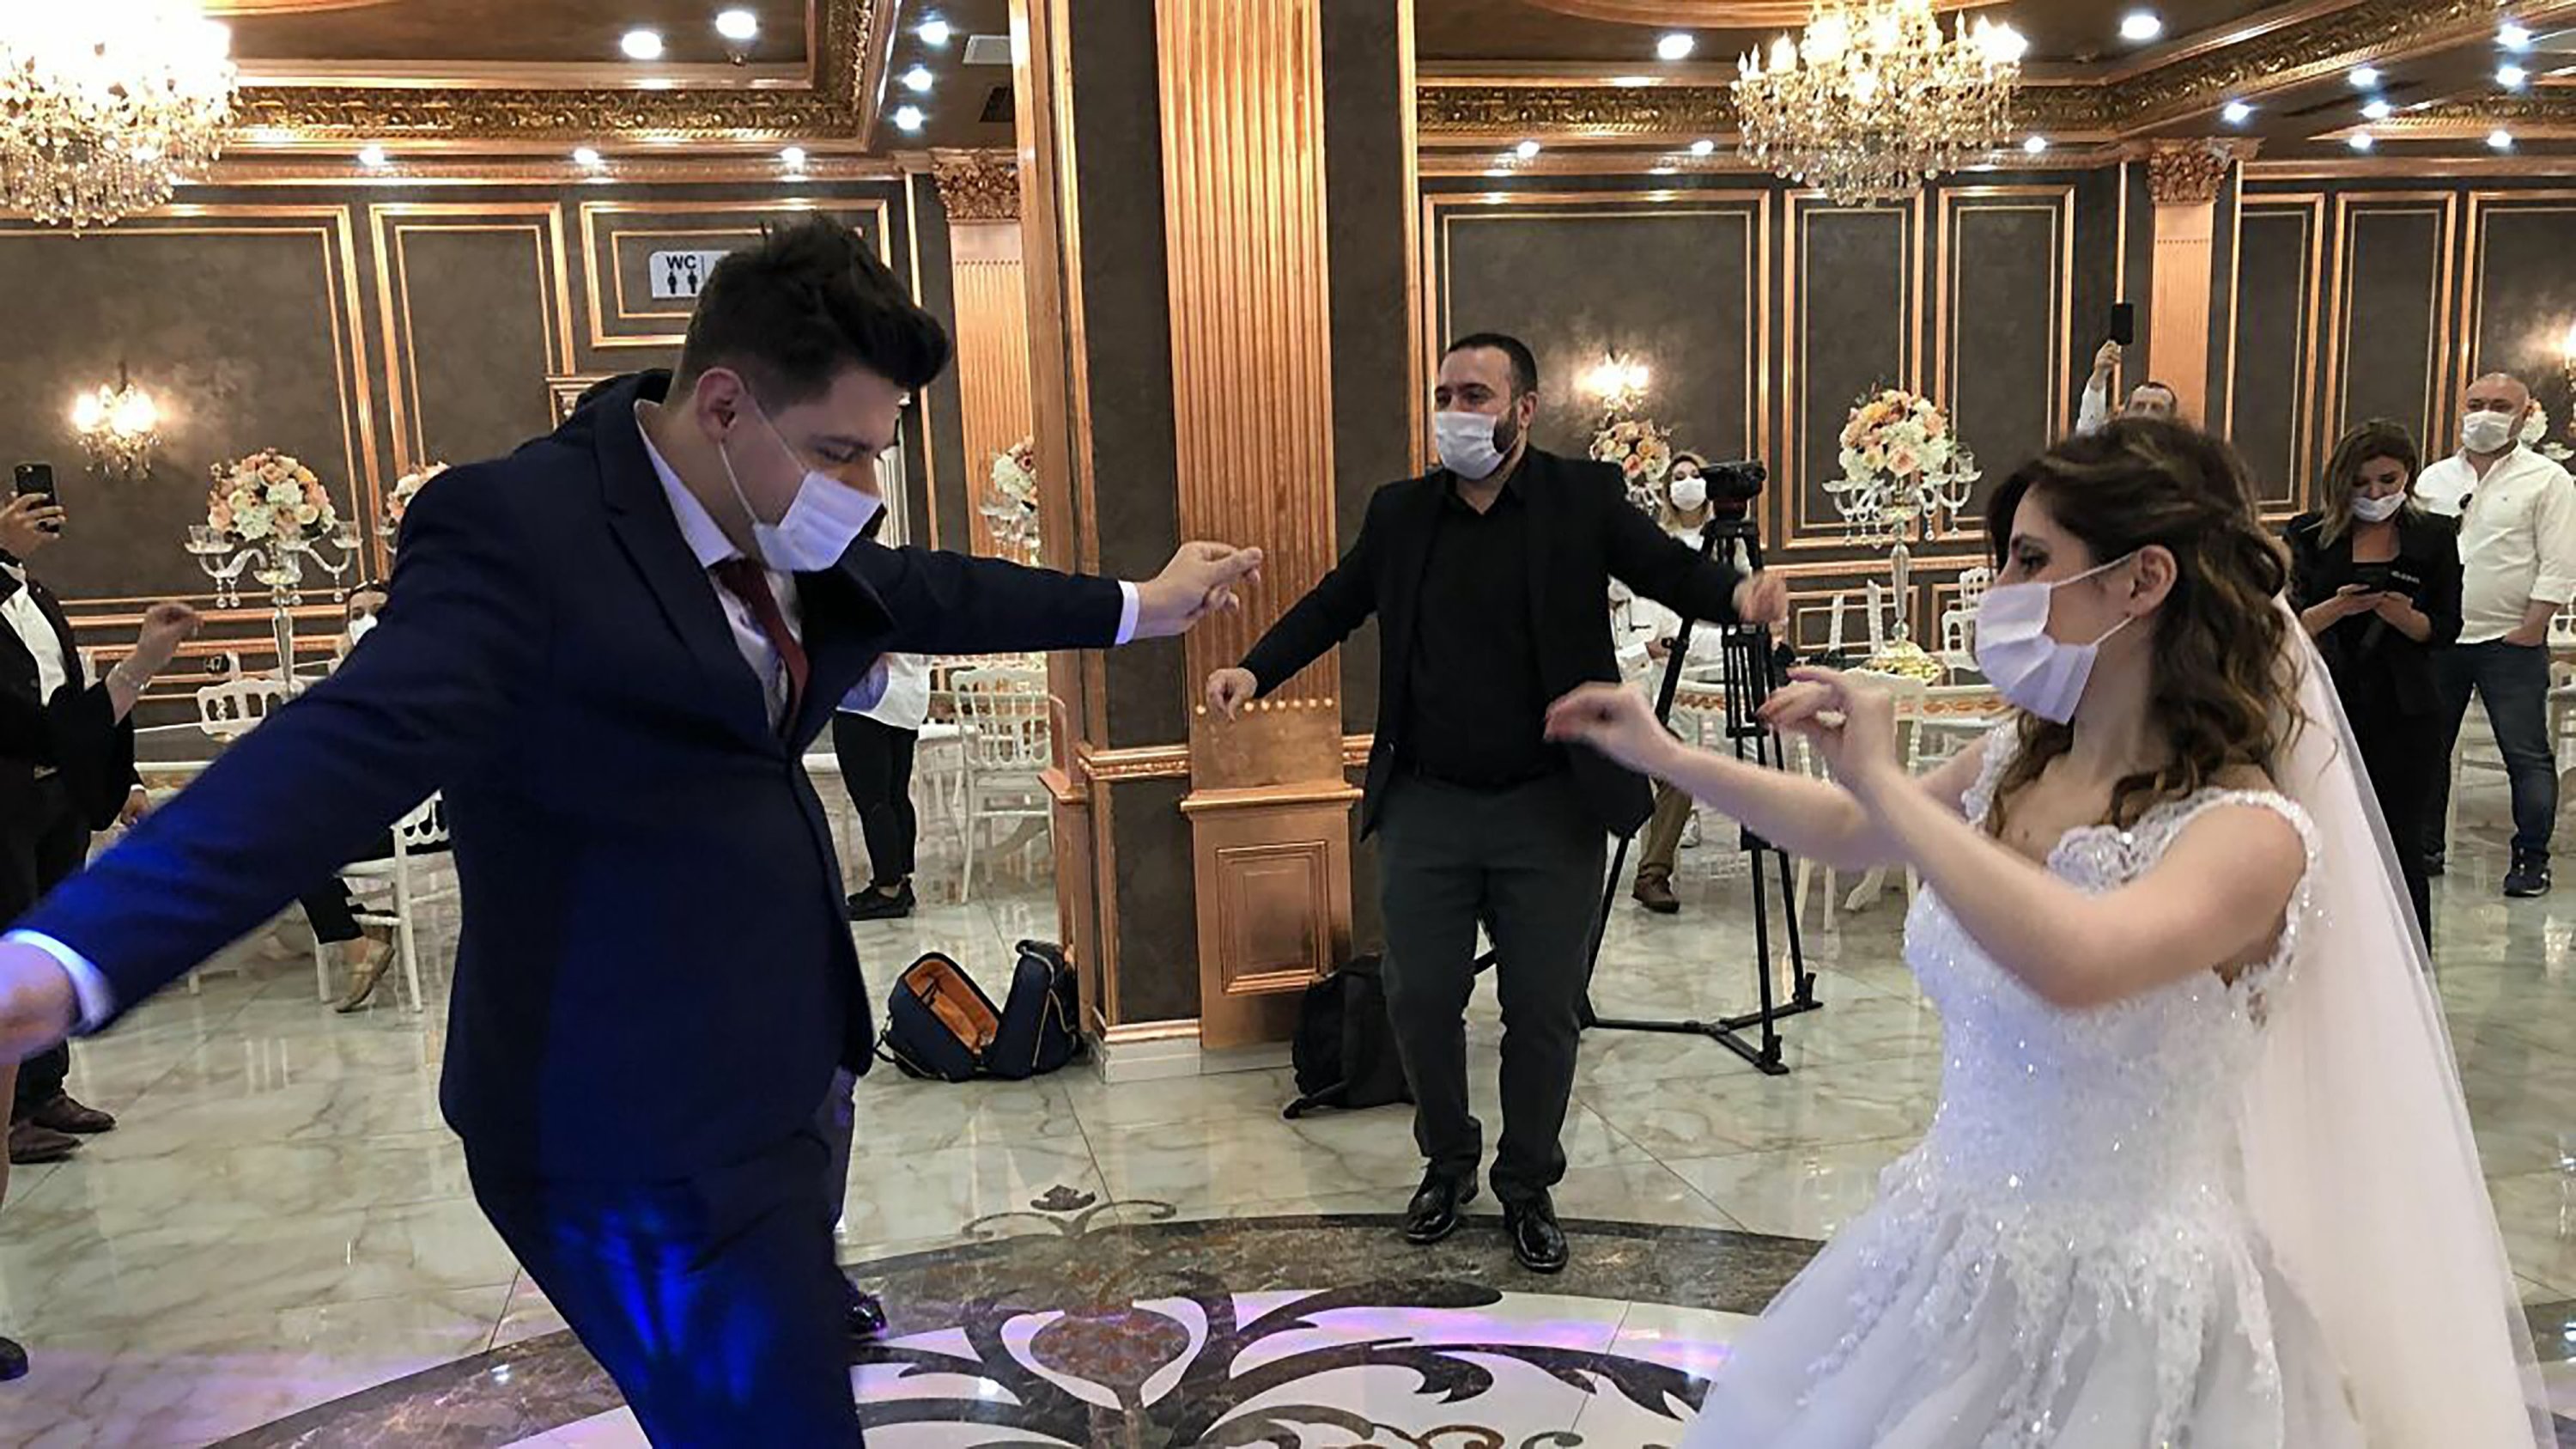 Restrictions On Weddings Tightened In Istanbul Amid Rising Covid 19 Cases Daily Sabah